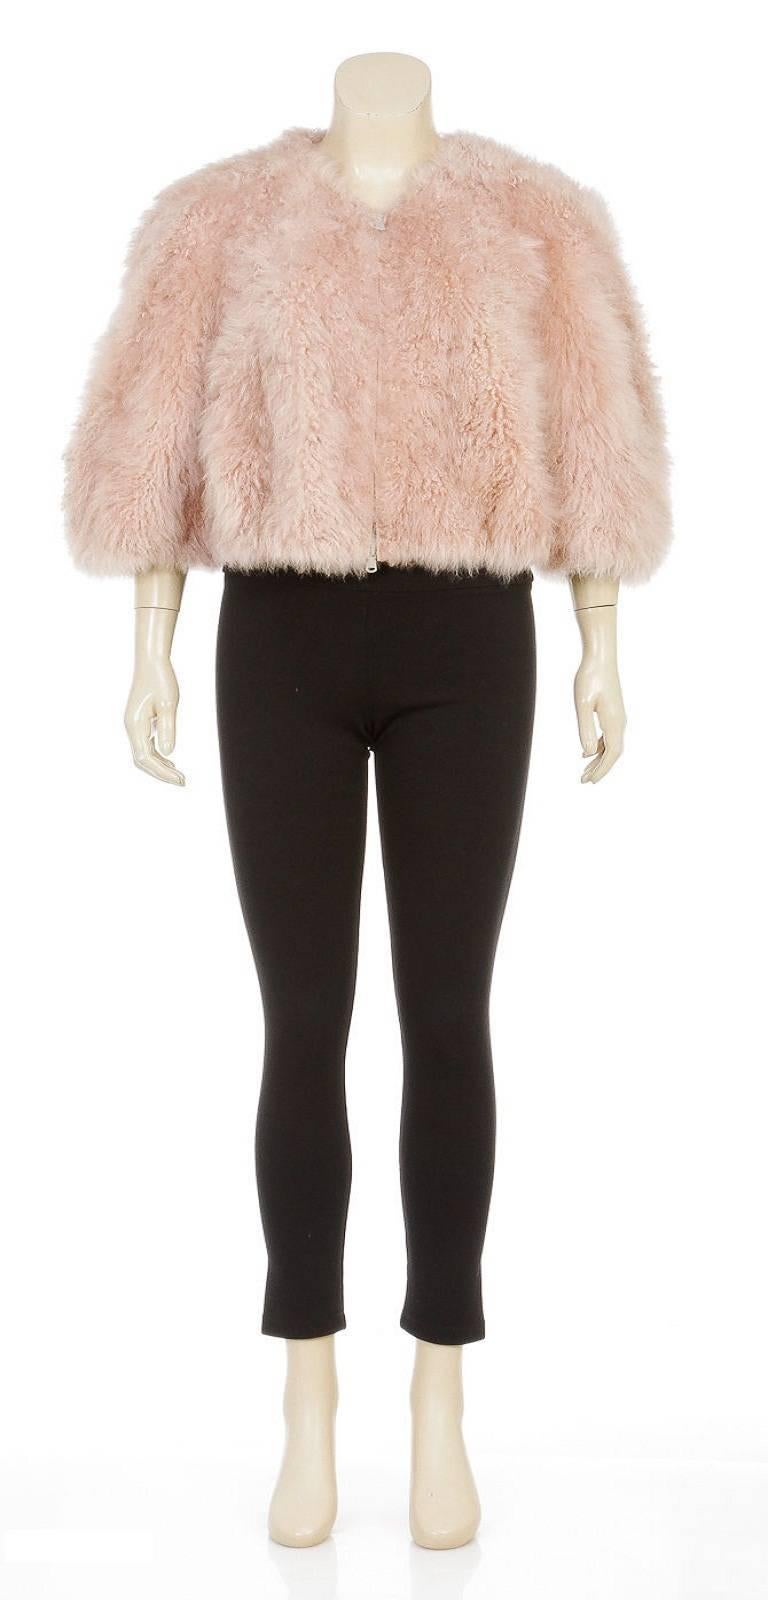 Flaunt your fabulous fashion sense with this amazing jacket by the one and only Brunello Cucinelli! This rose colored jacket makes for an incredibly extravagant wear as it is constructed from sheepskin. You won't be able to keep your hands off of